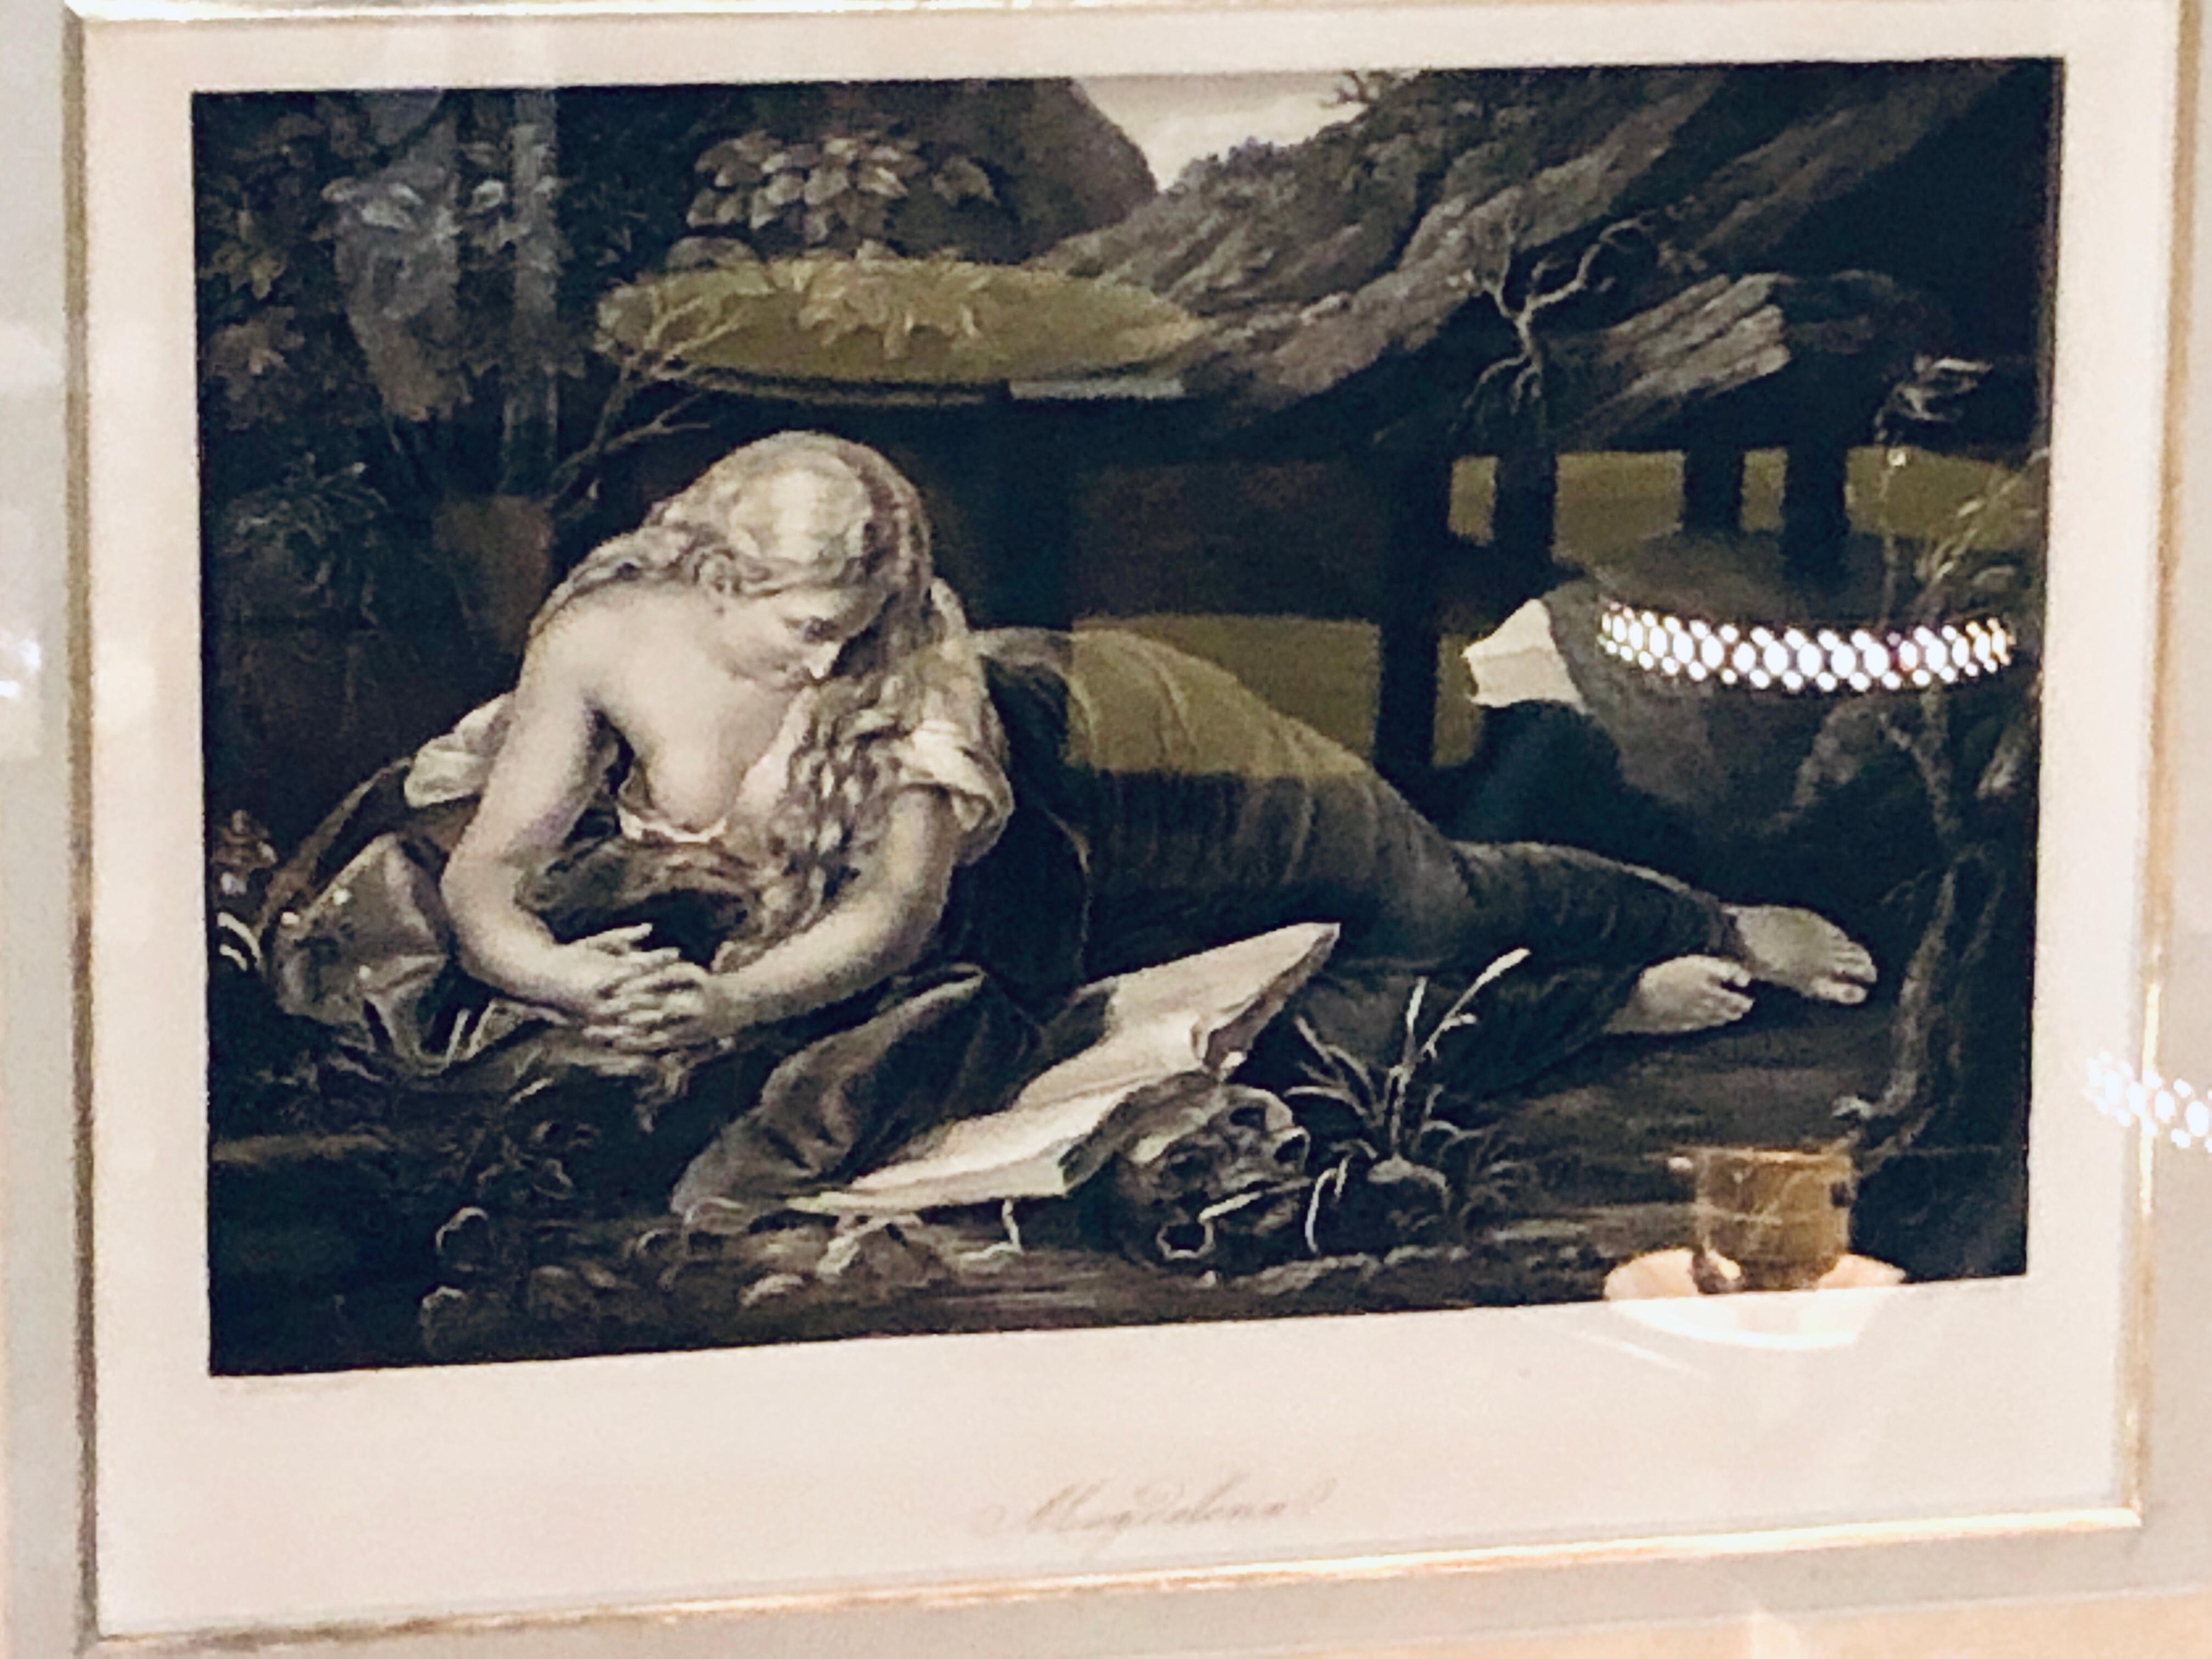 Diminutive etching of Magdelena in a gilt frame signed and dated. This highly decorative print is 6 inches x 8 inches unframed and when sitting in its finely gilt and carved frame it measures 11 by 14 inches. Very well done, signed and dated in a